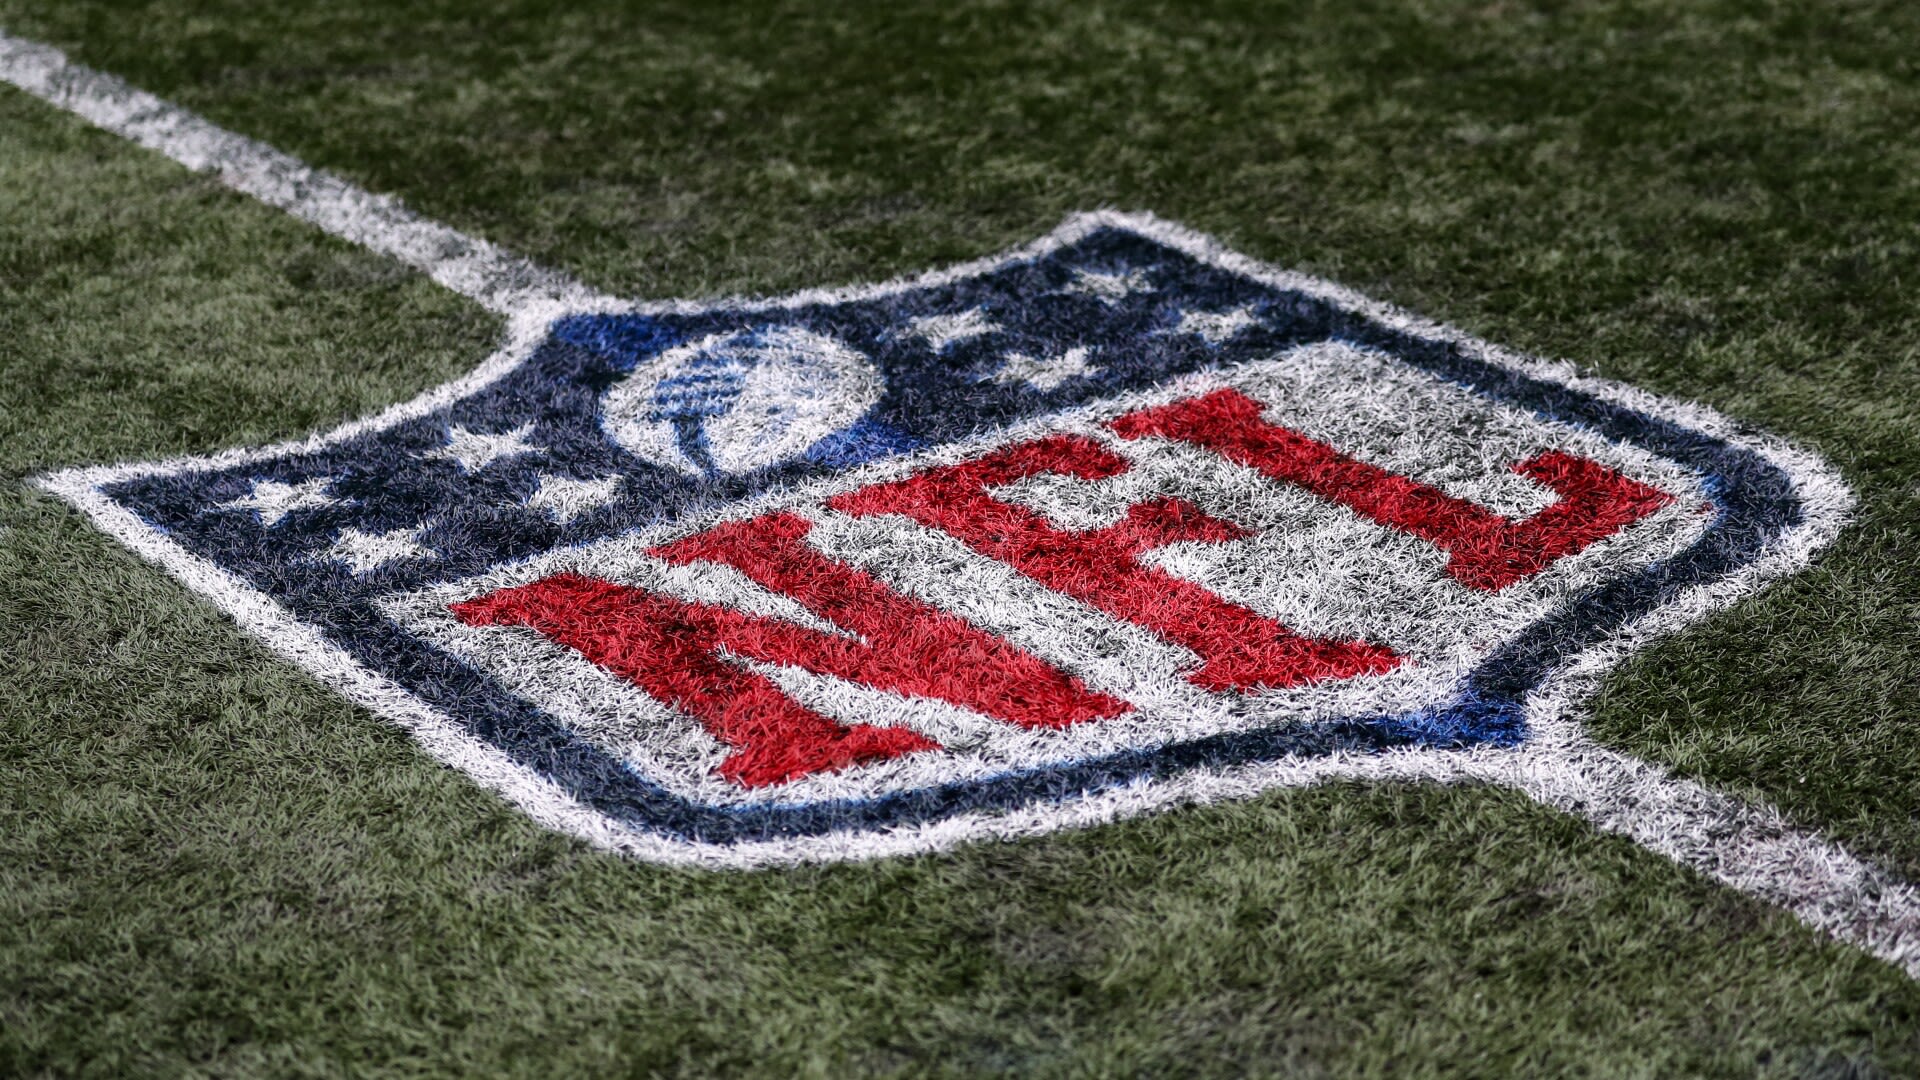 Why is the NFL marginalizing NFL Network?